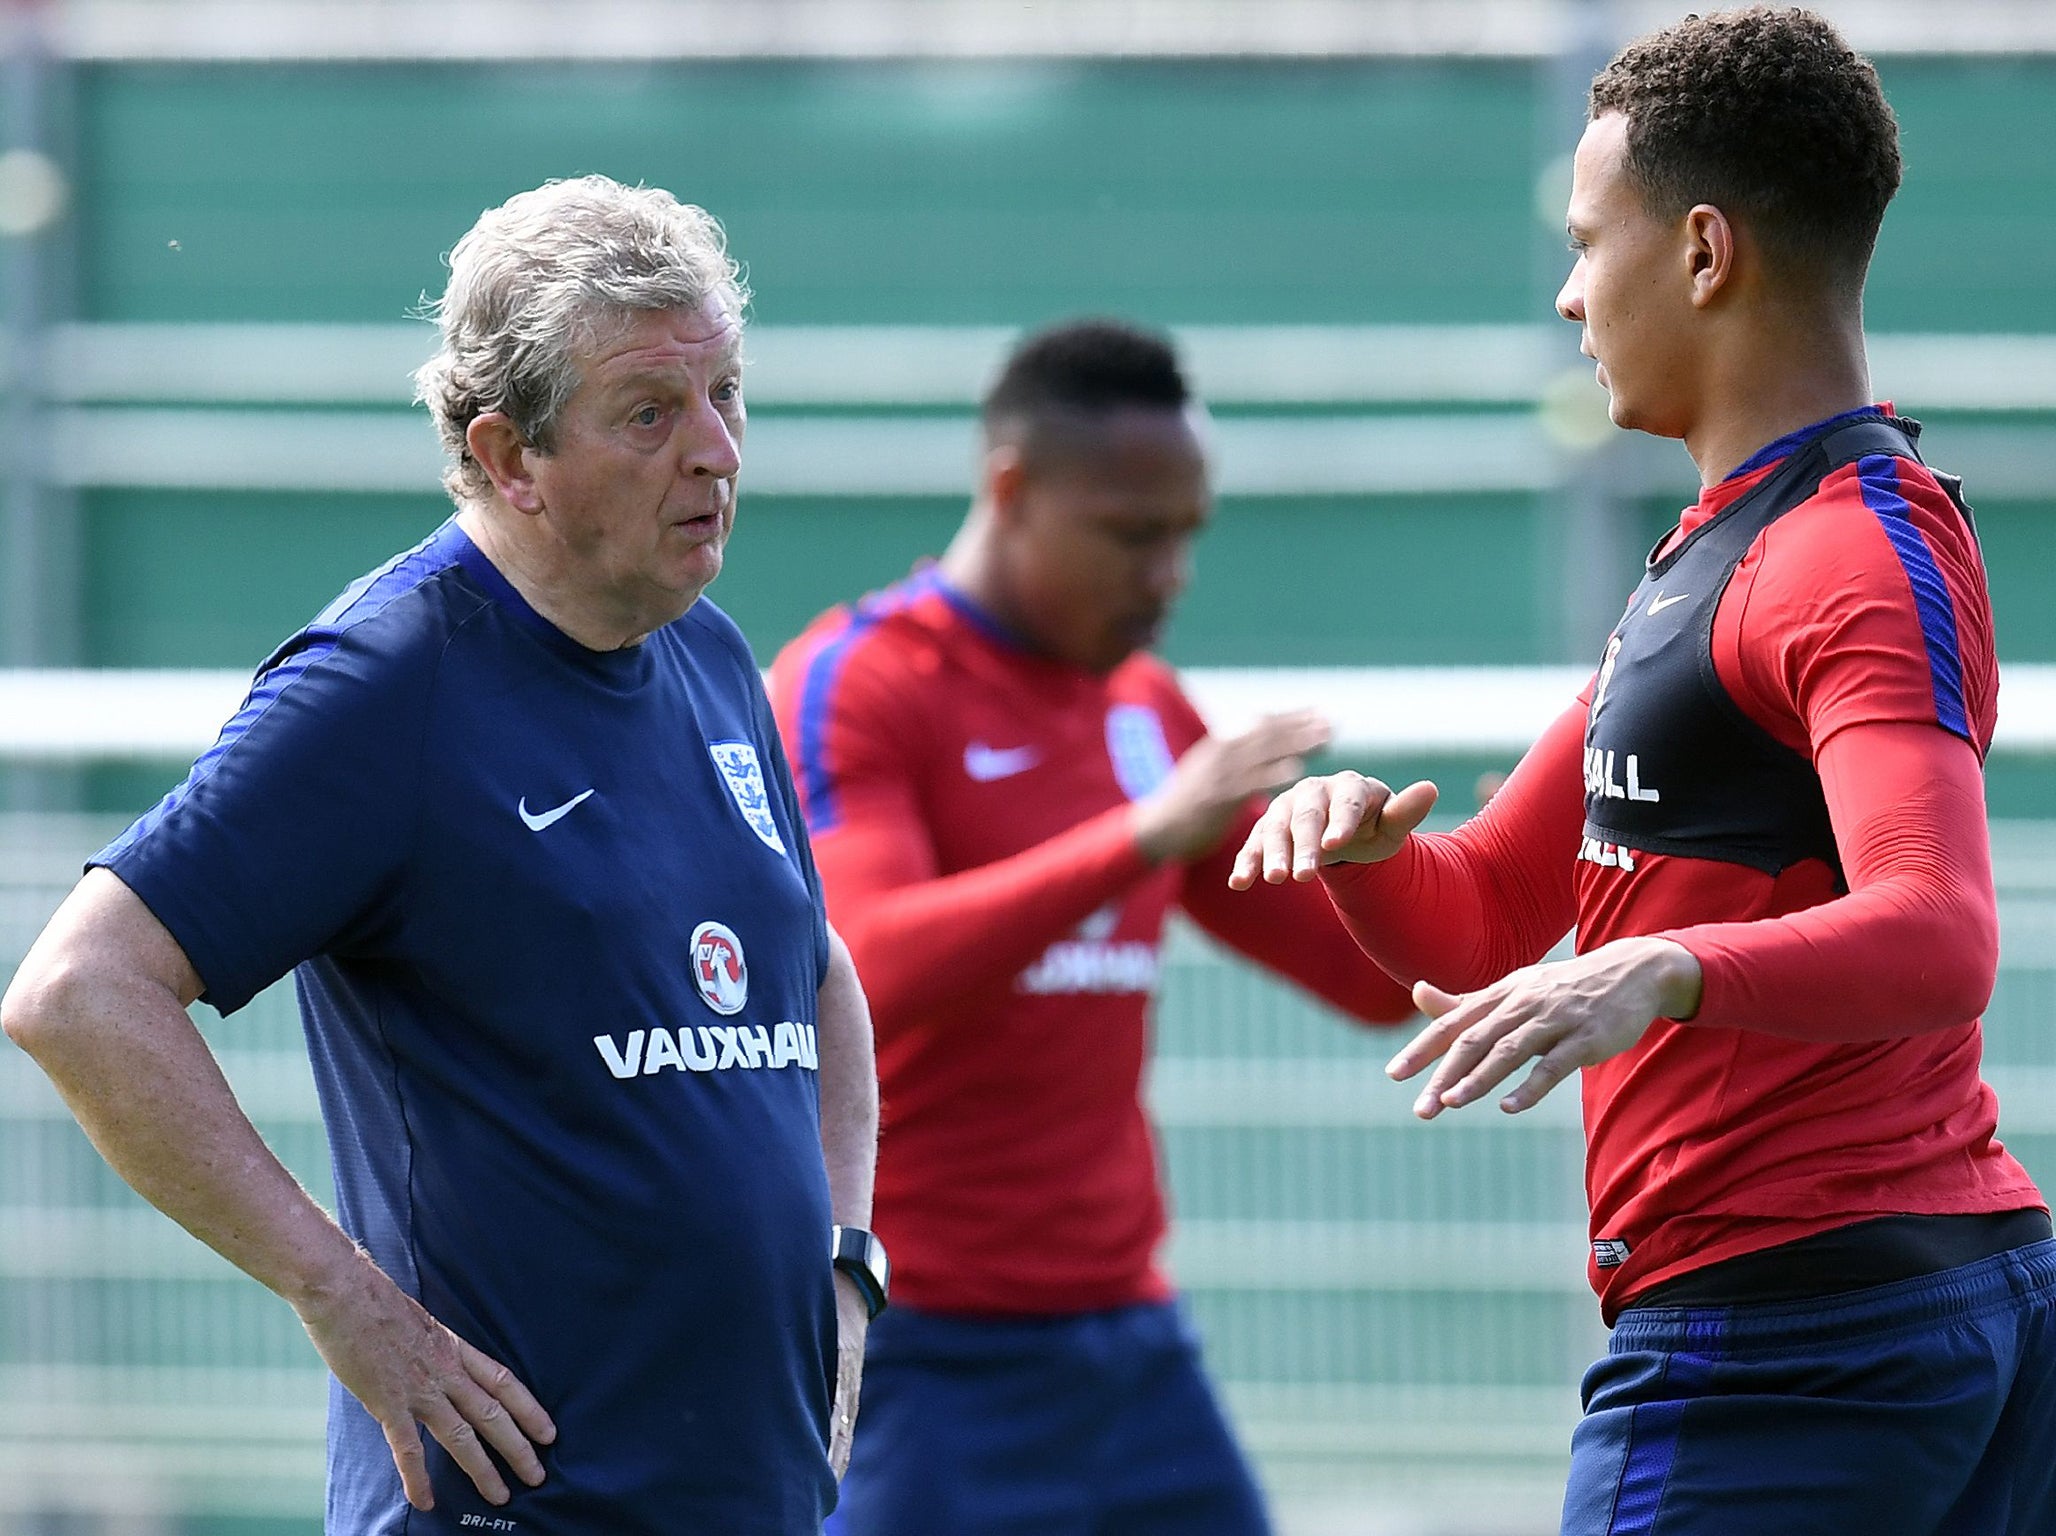 Hodgson is used to working with the likes of Alli, Kane and Dier